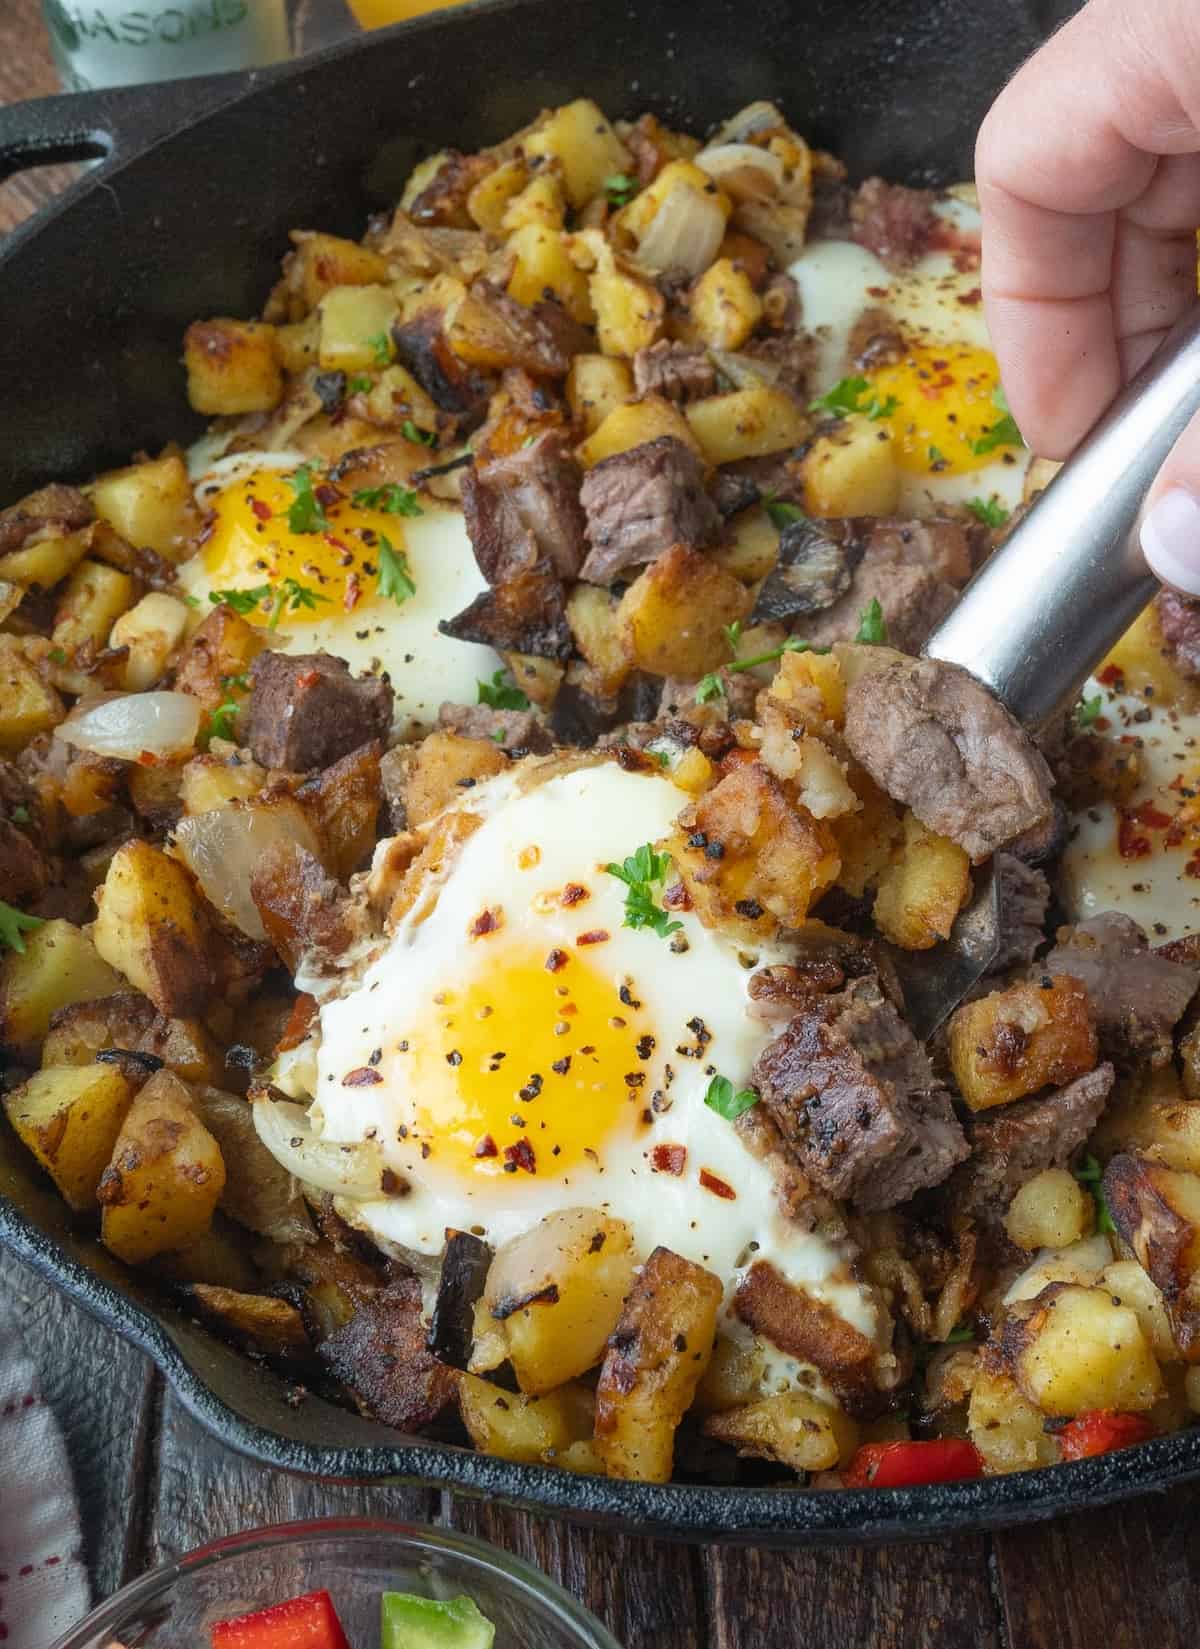 Using a spatula to scoop breakfast hash out of a skillet.